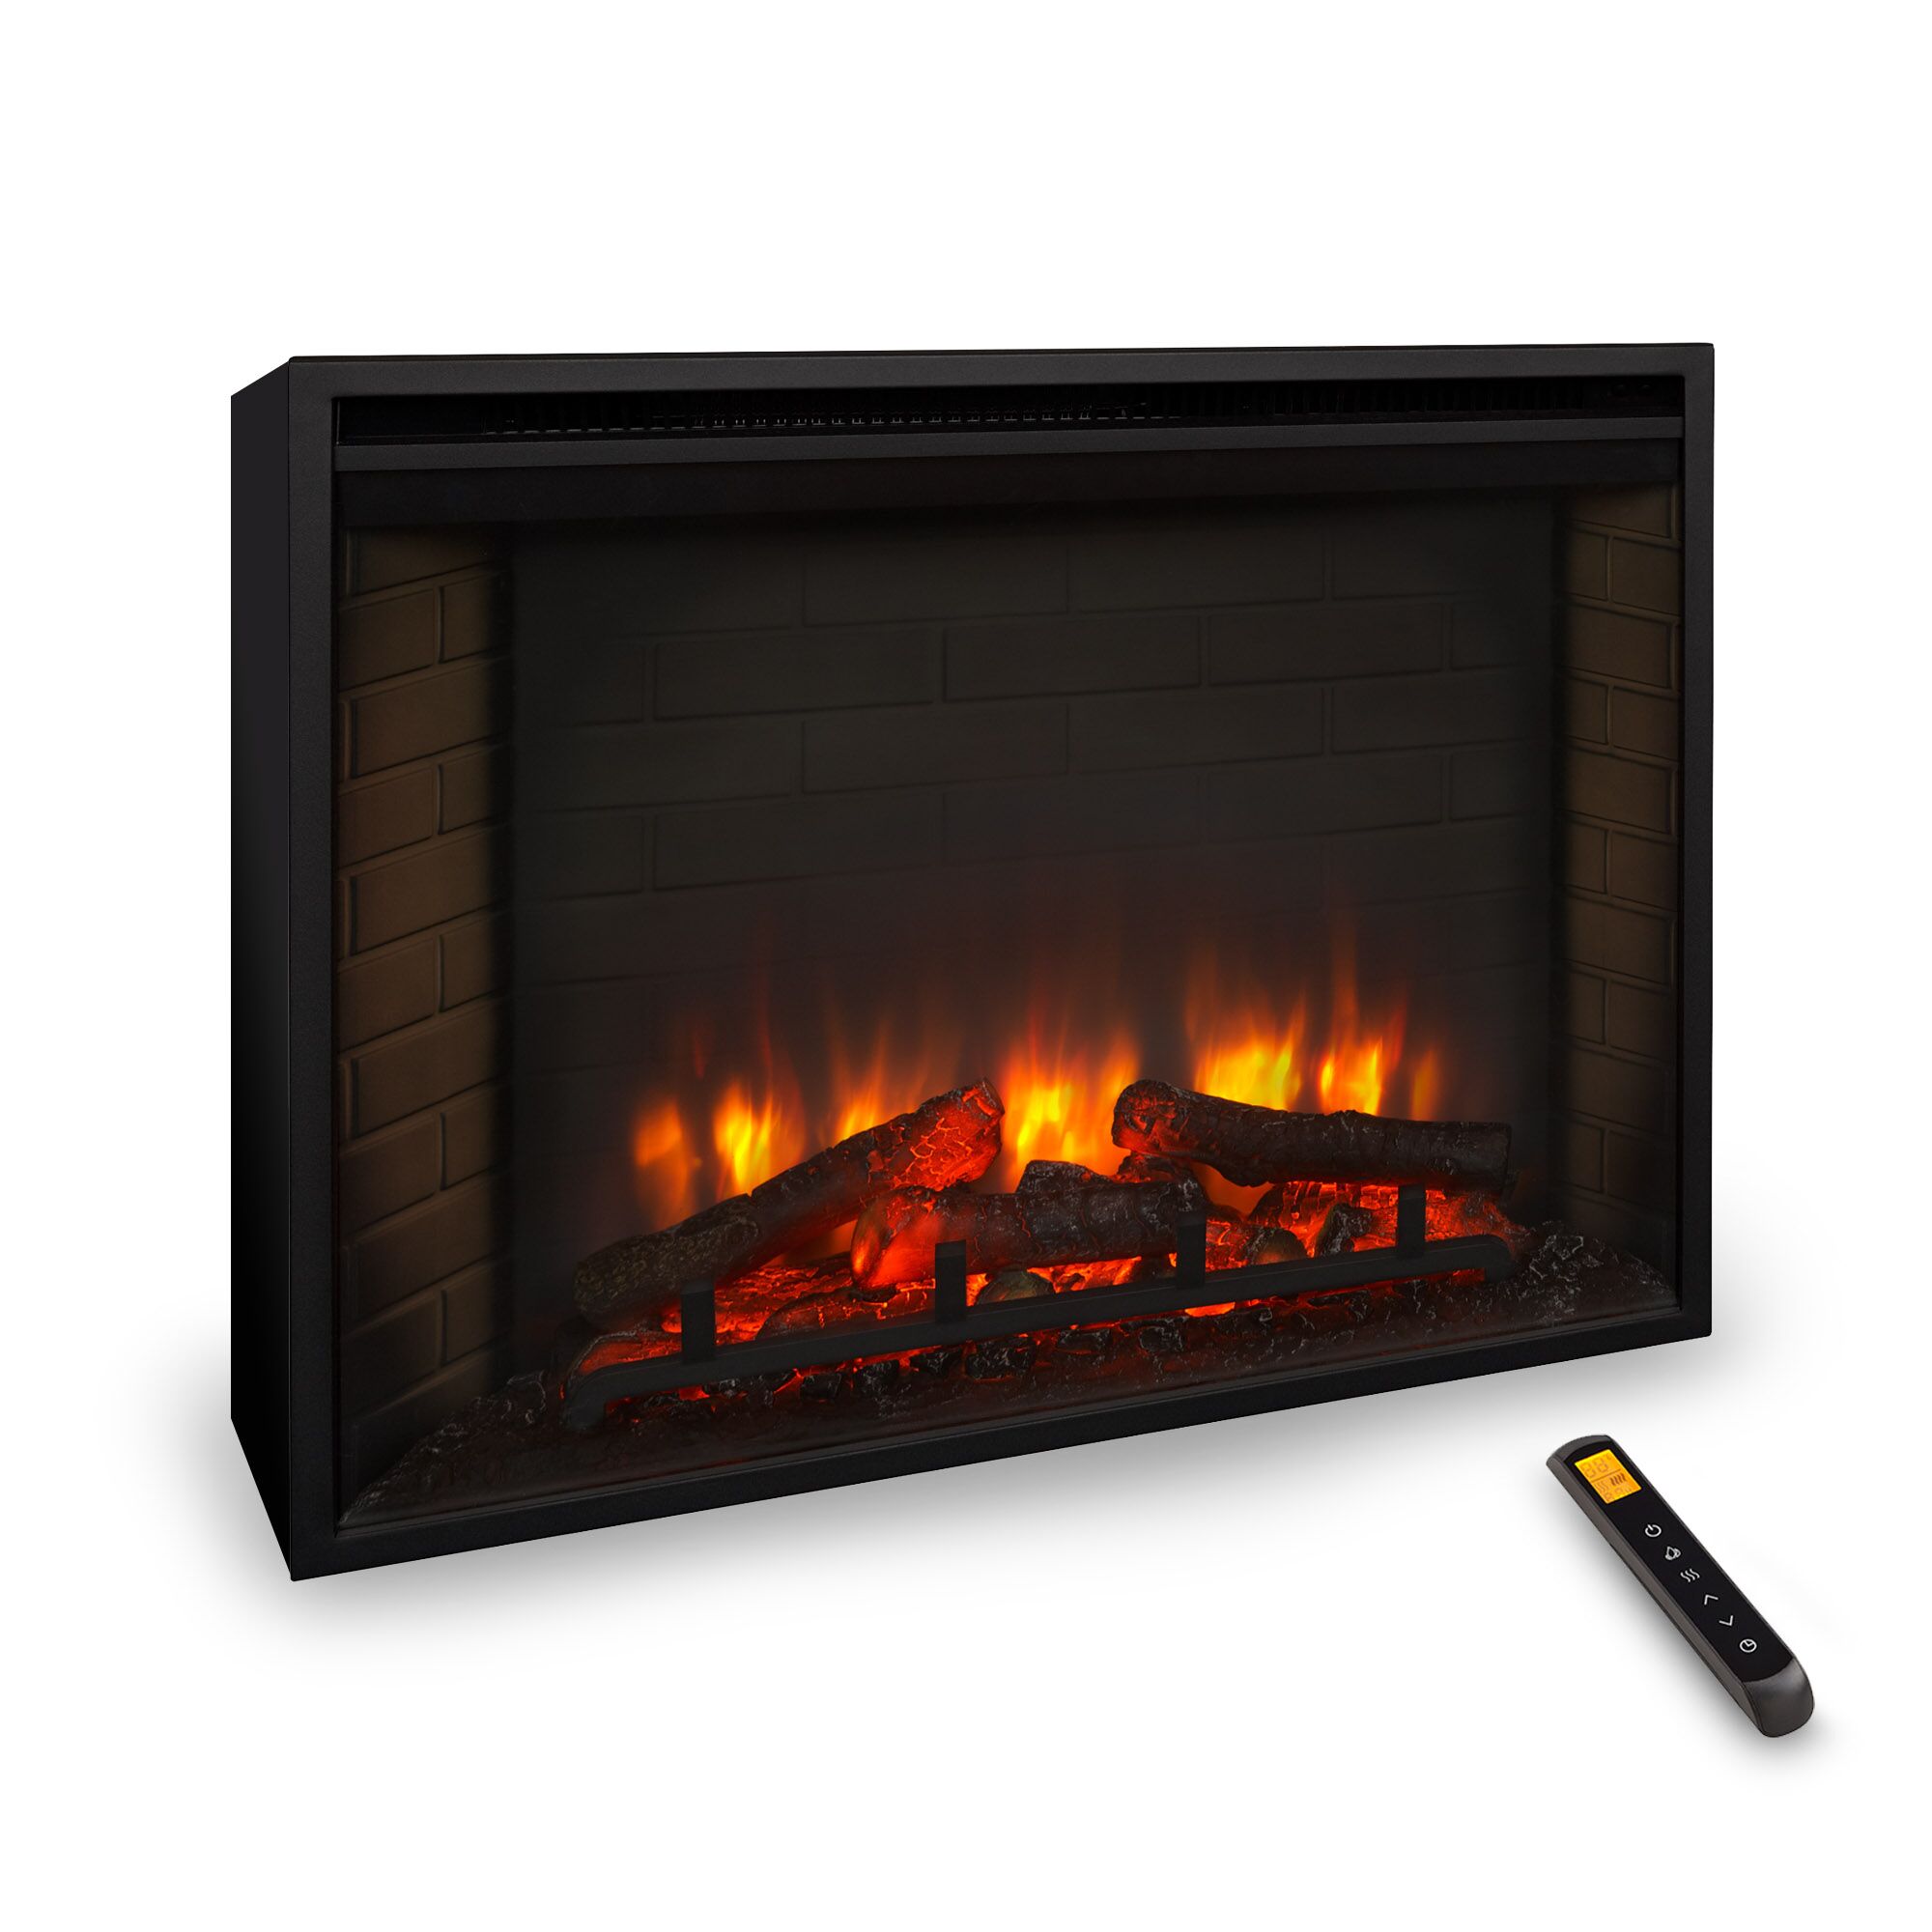 30 in built-in electric fireplace only product image